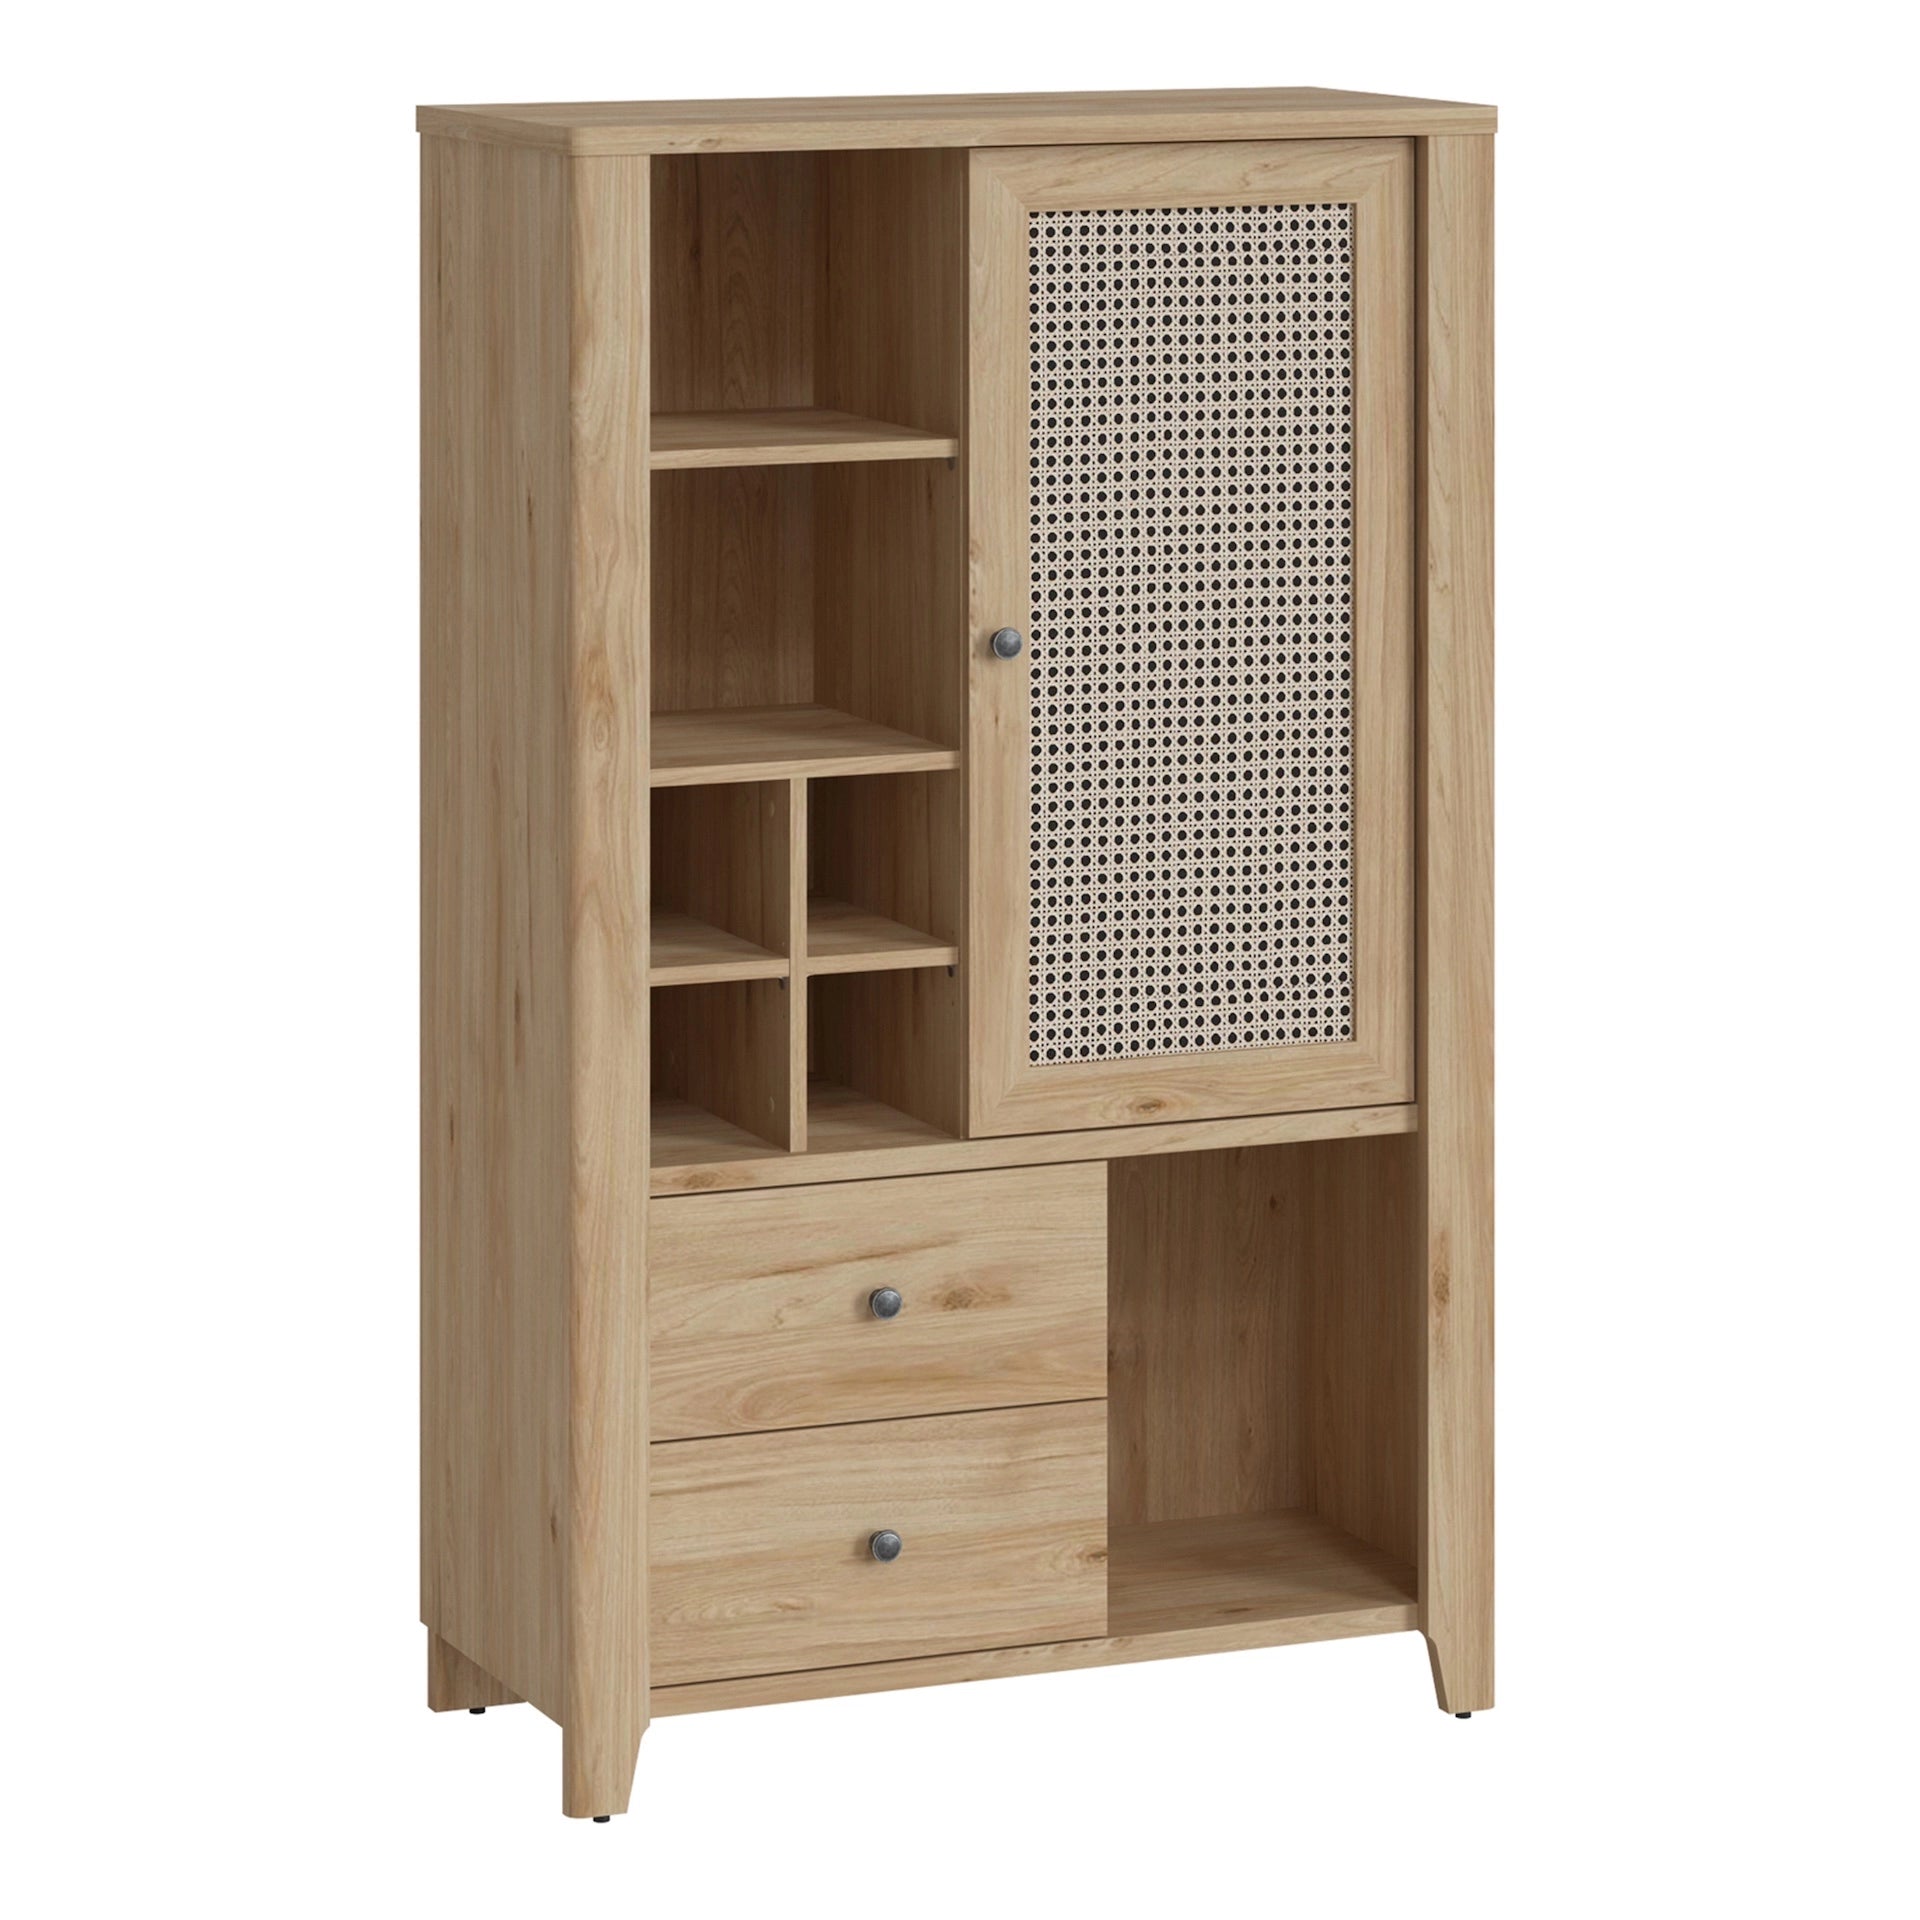 Furniture To Go Cestino 1 Door 2 Drawer Cabinet in Jackson Hickory Oak & Rattan Effect